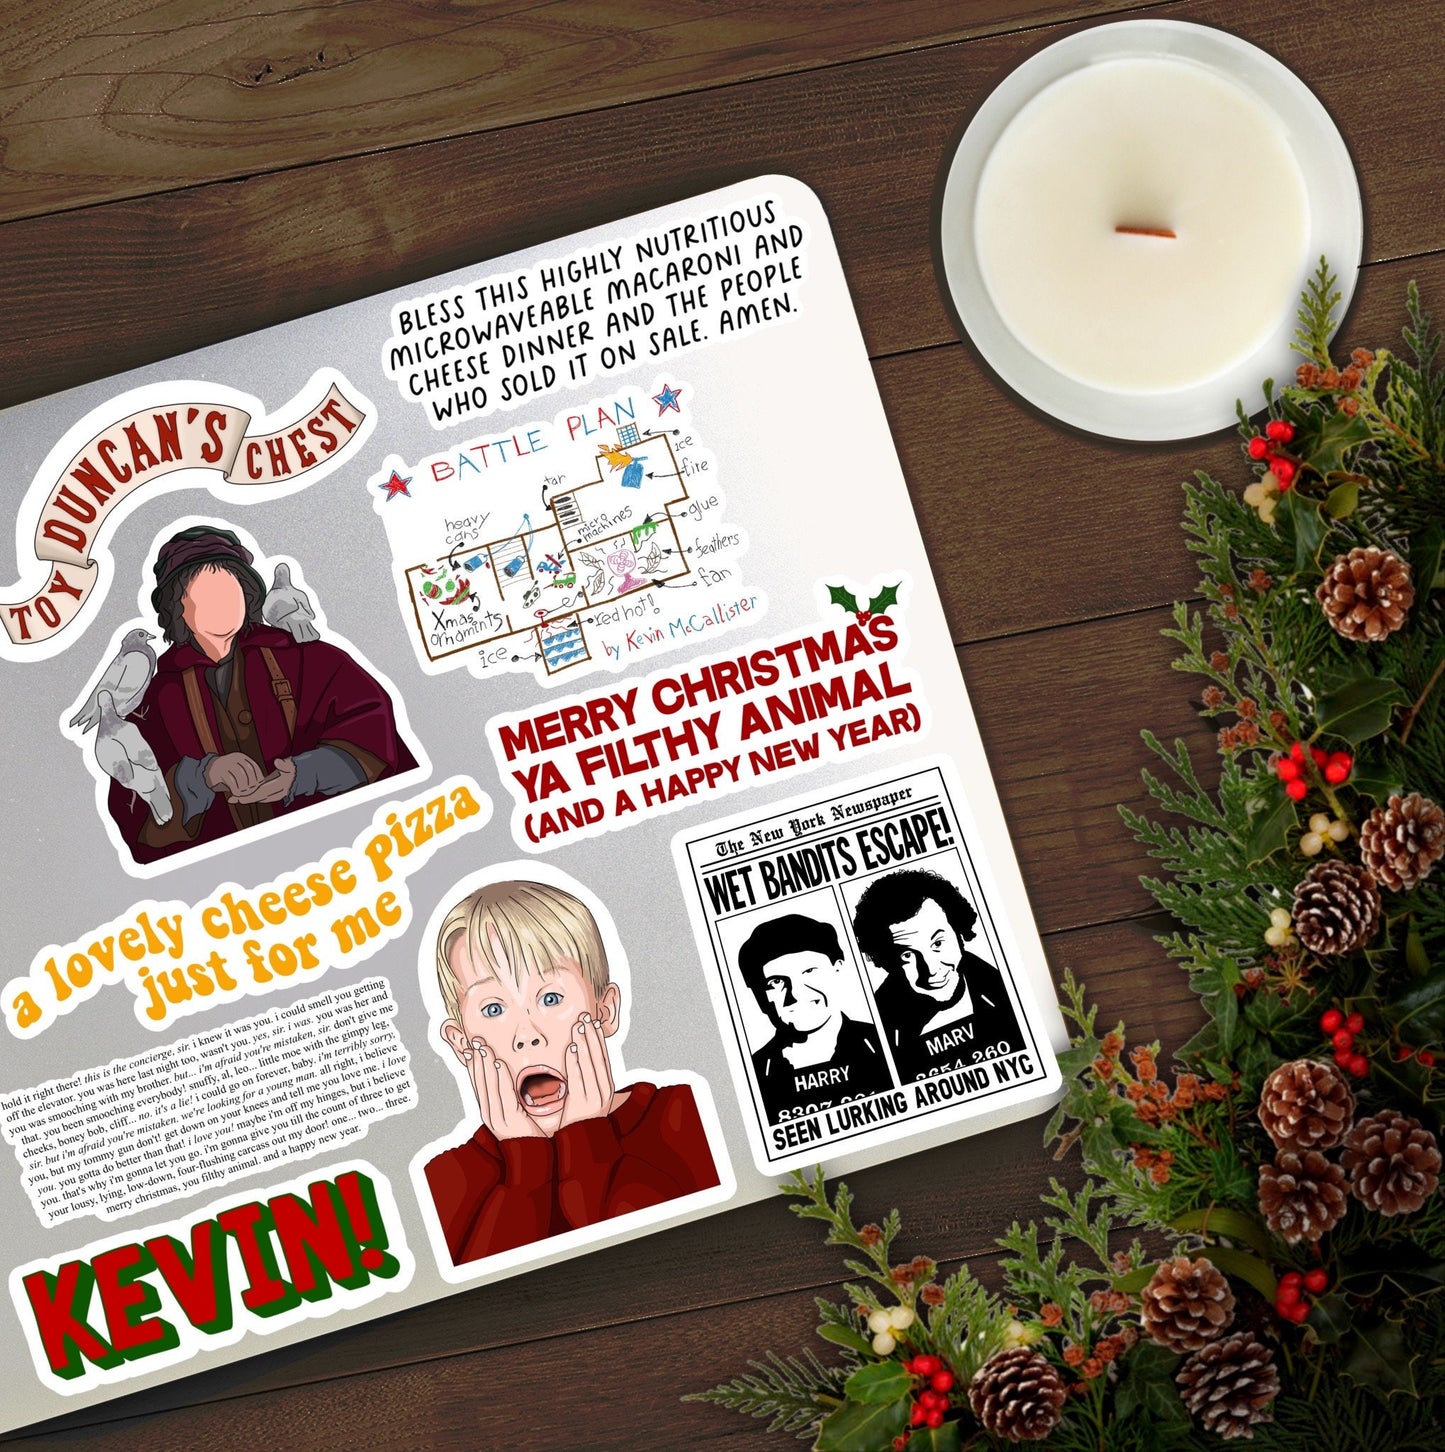 A Whole Cheese Pizza Just for Me | Home Alone Stickers